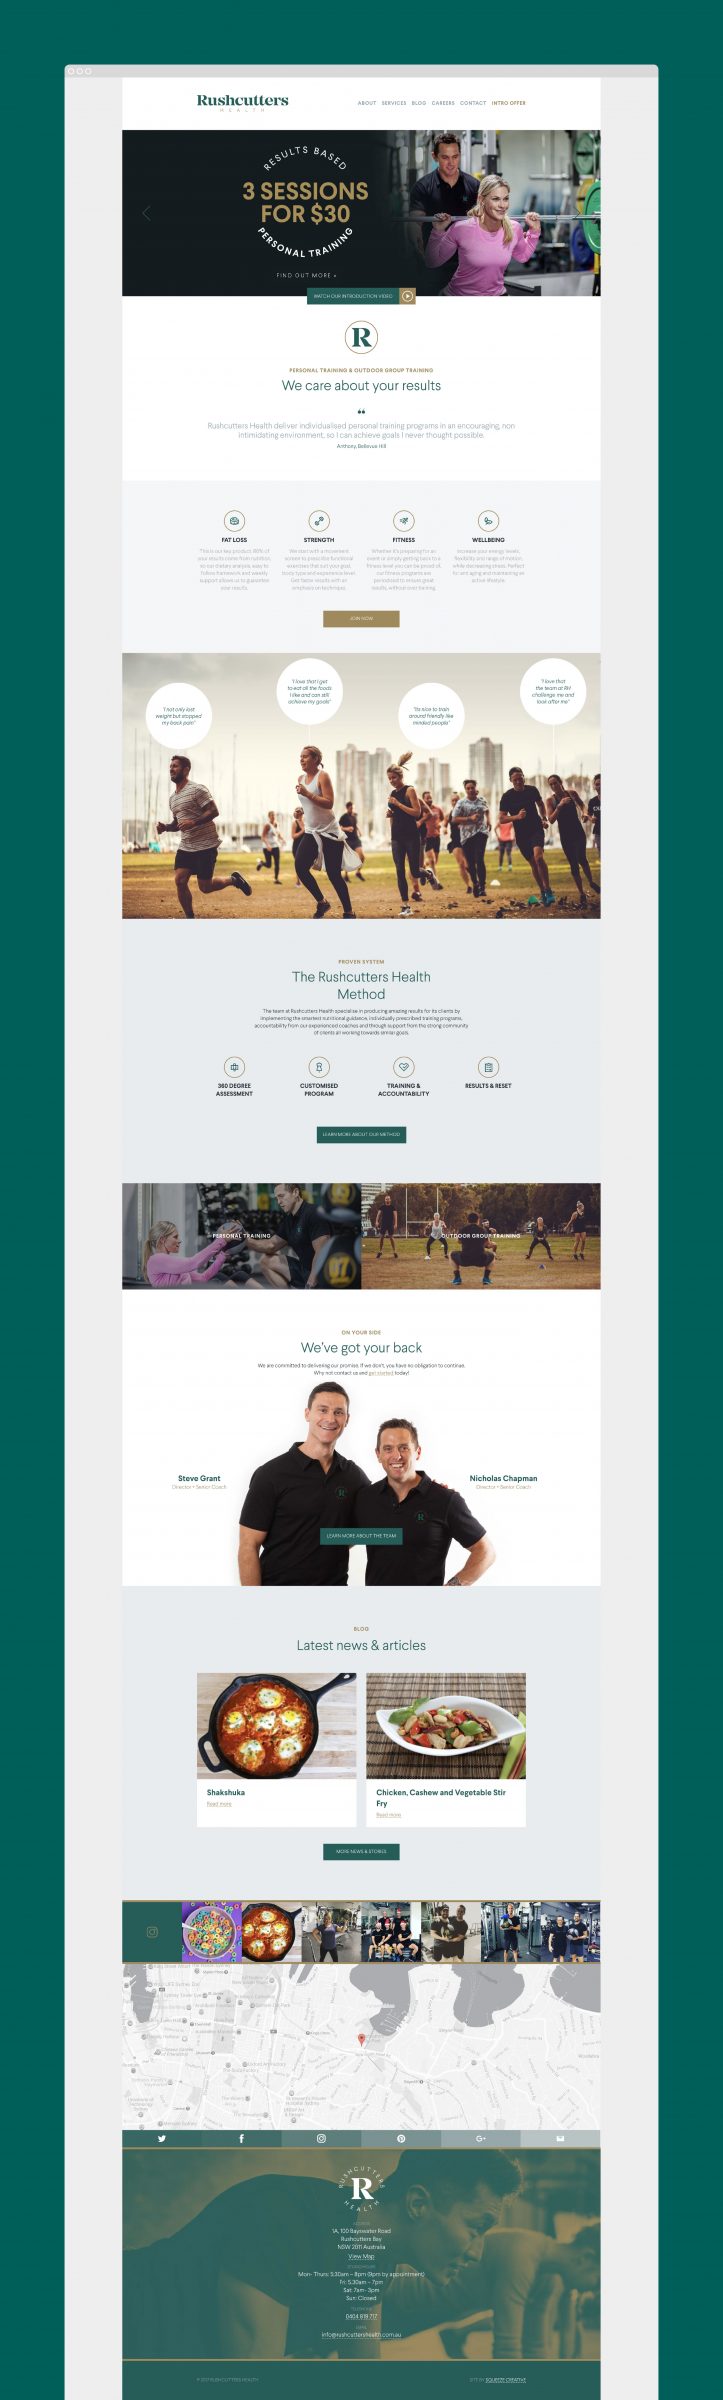 Rushcutters Health Gym Branding and Design